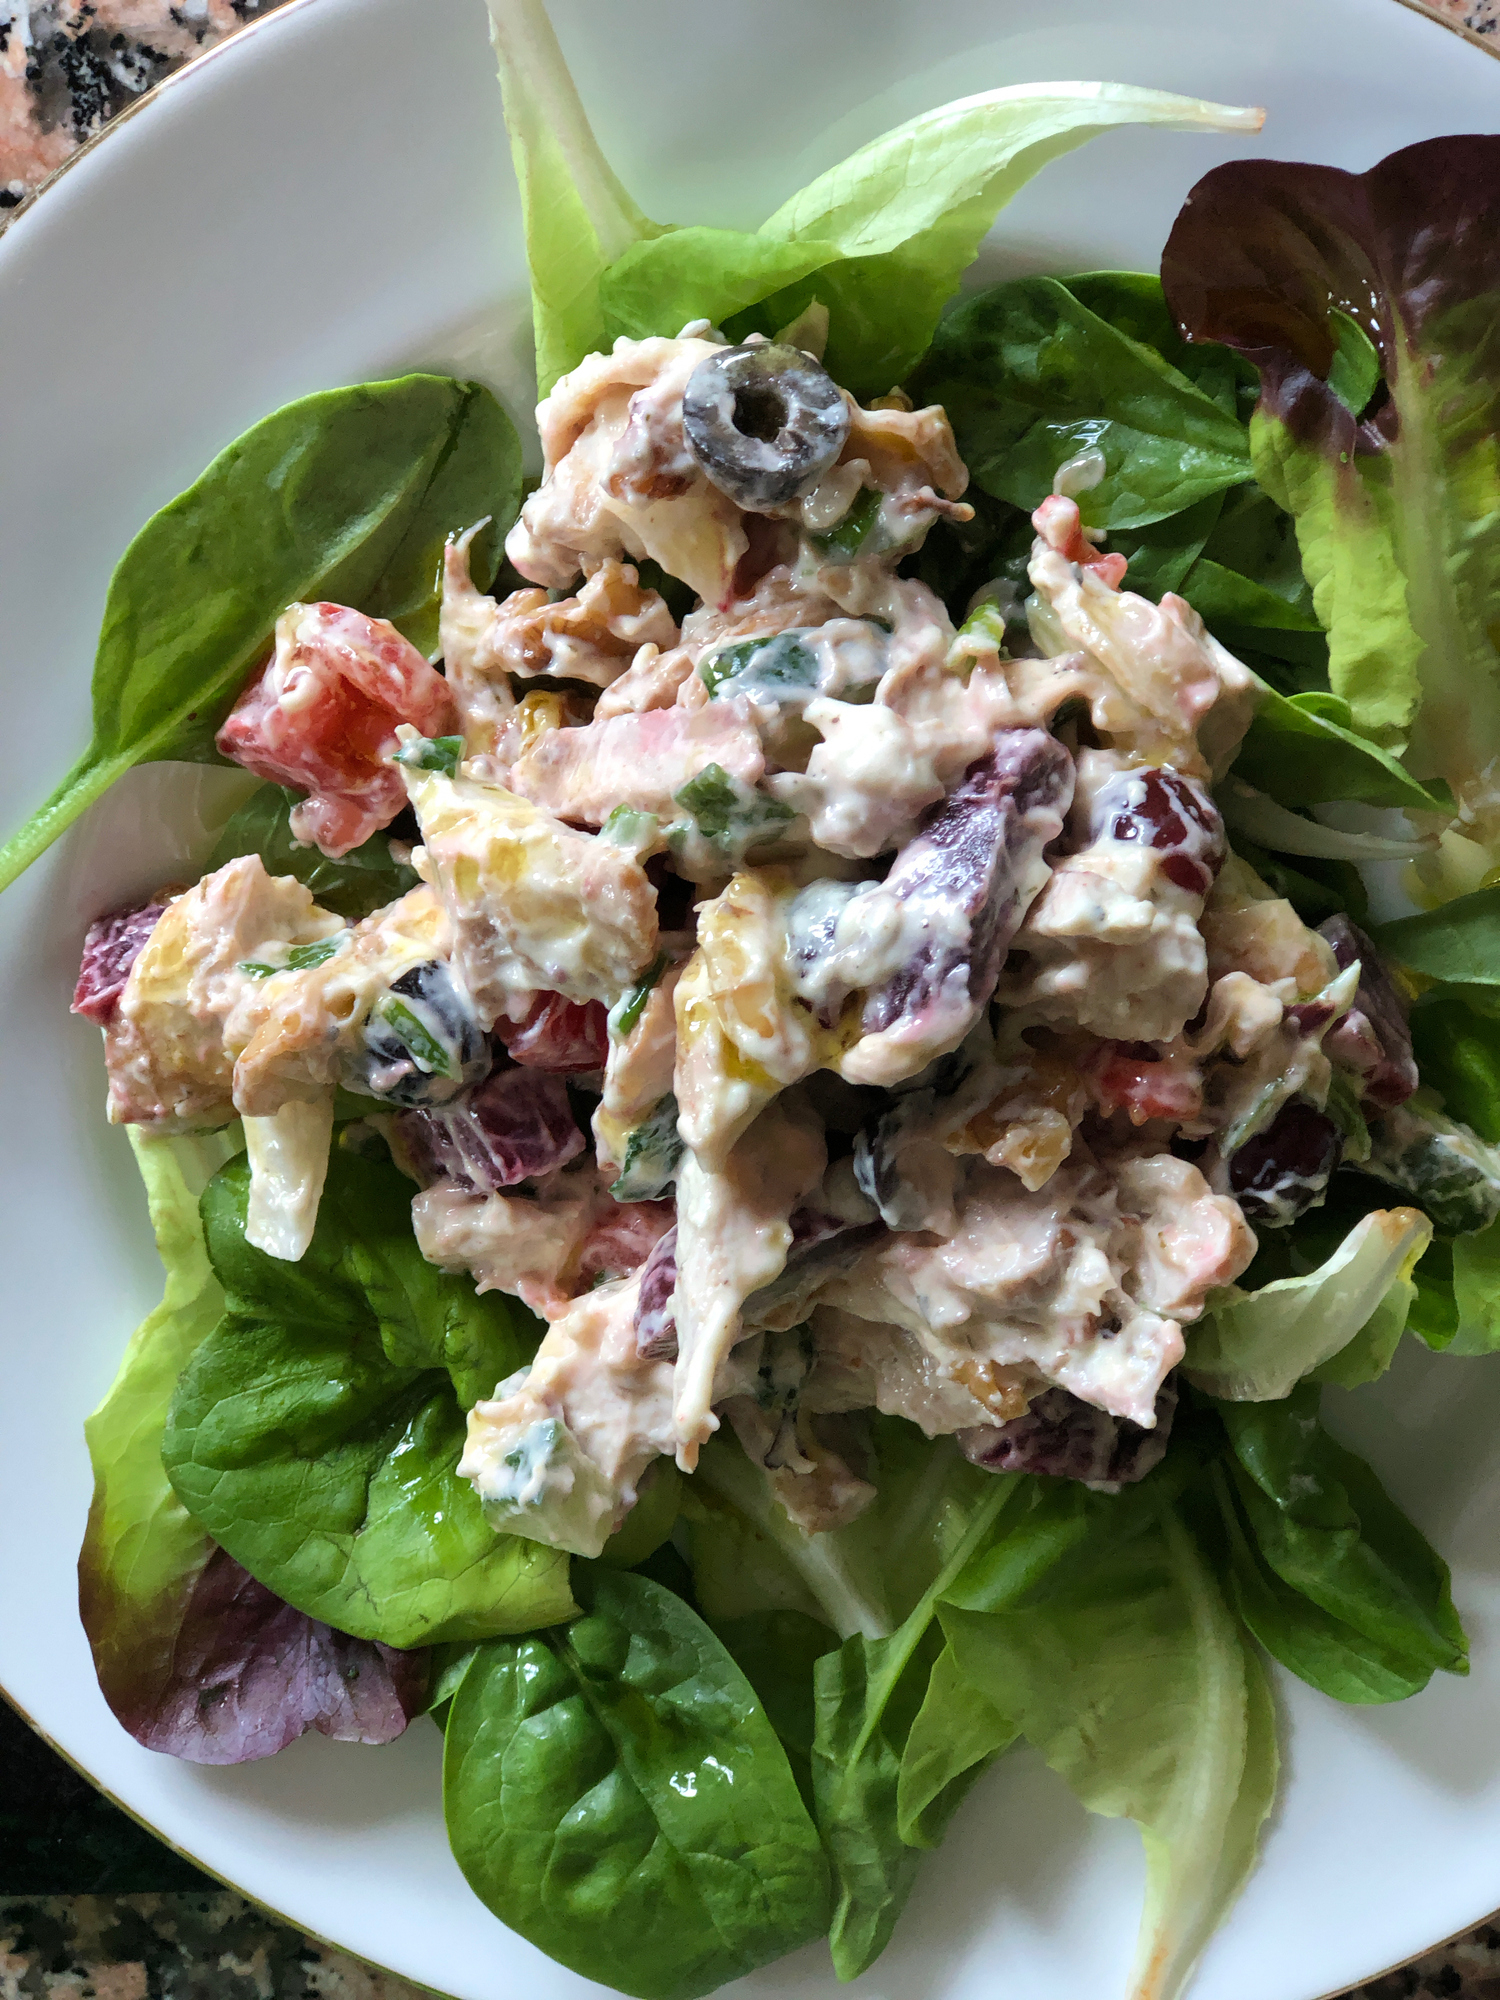 Chicken salad with vegetables on a bed of lettuce